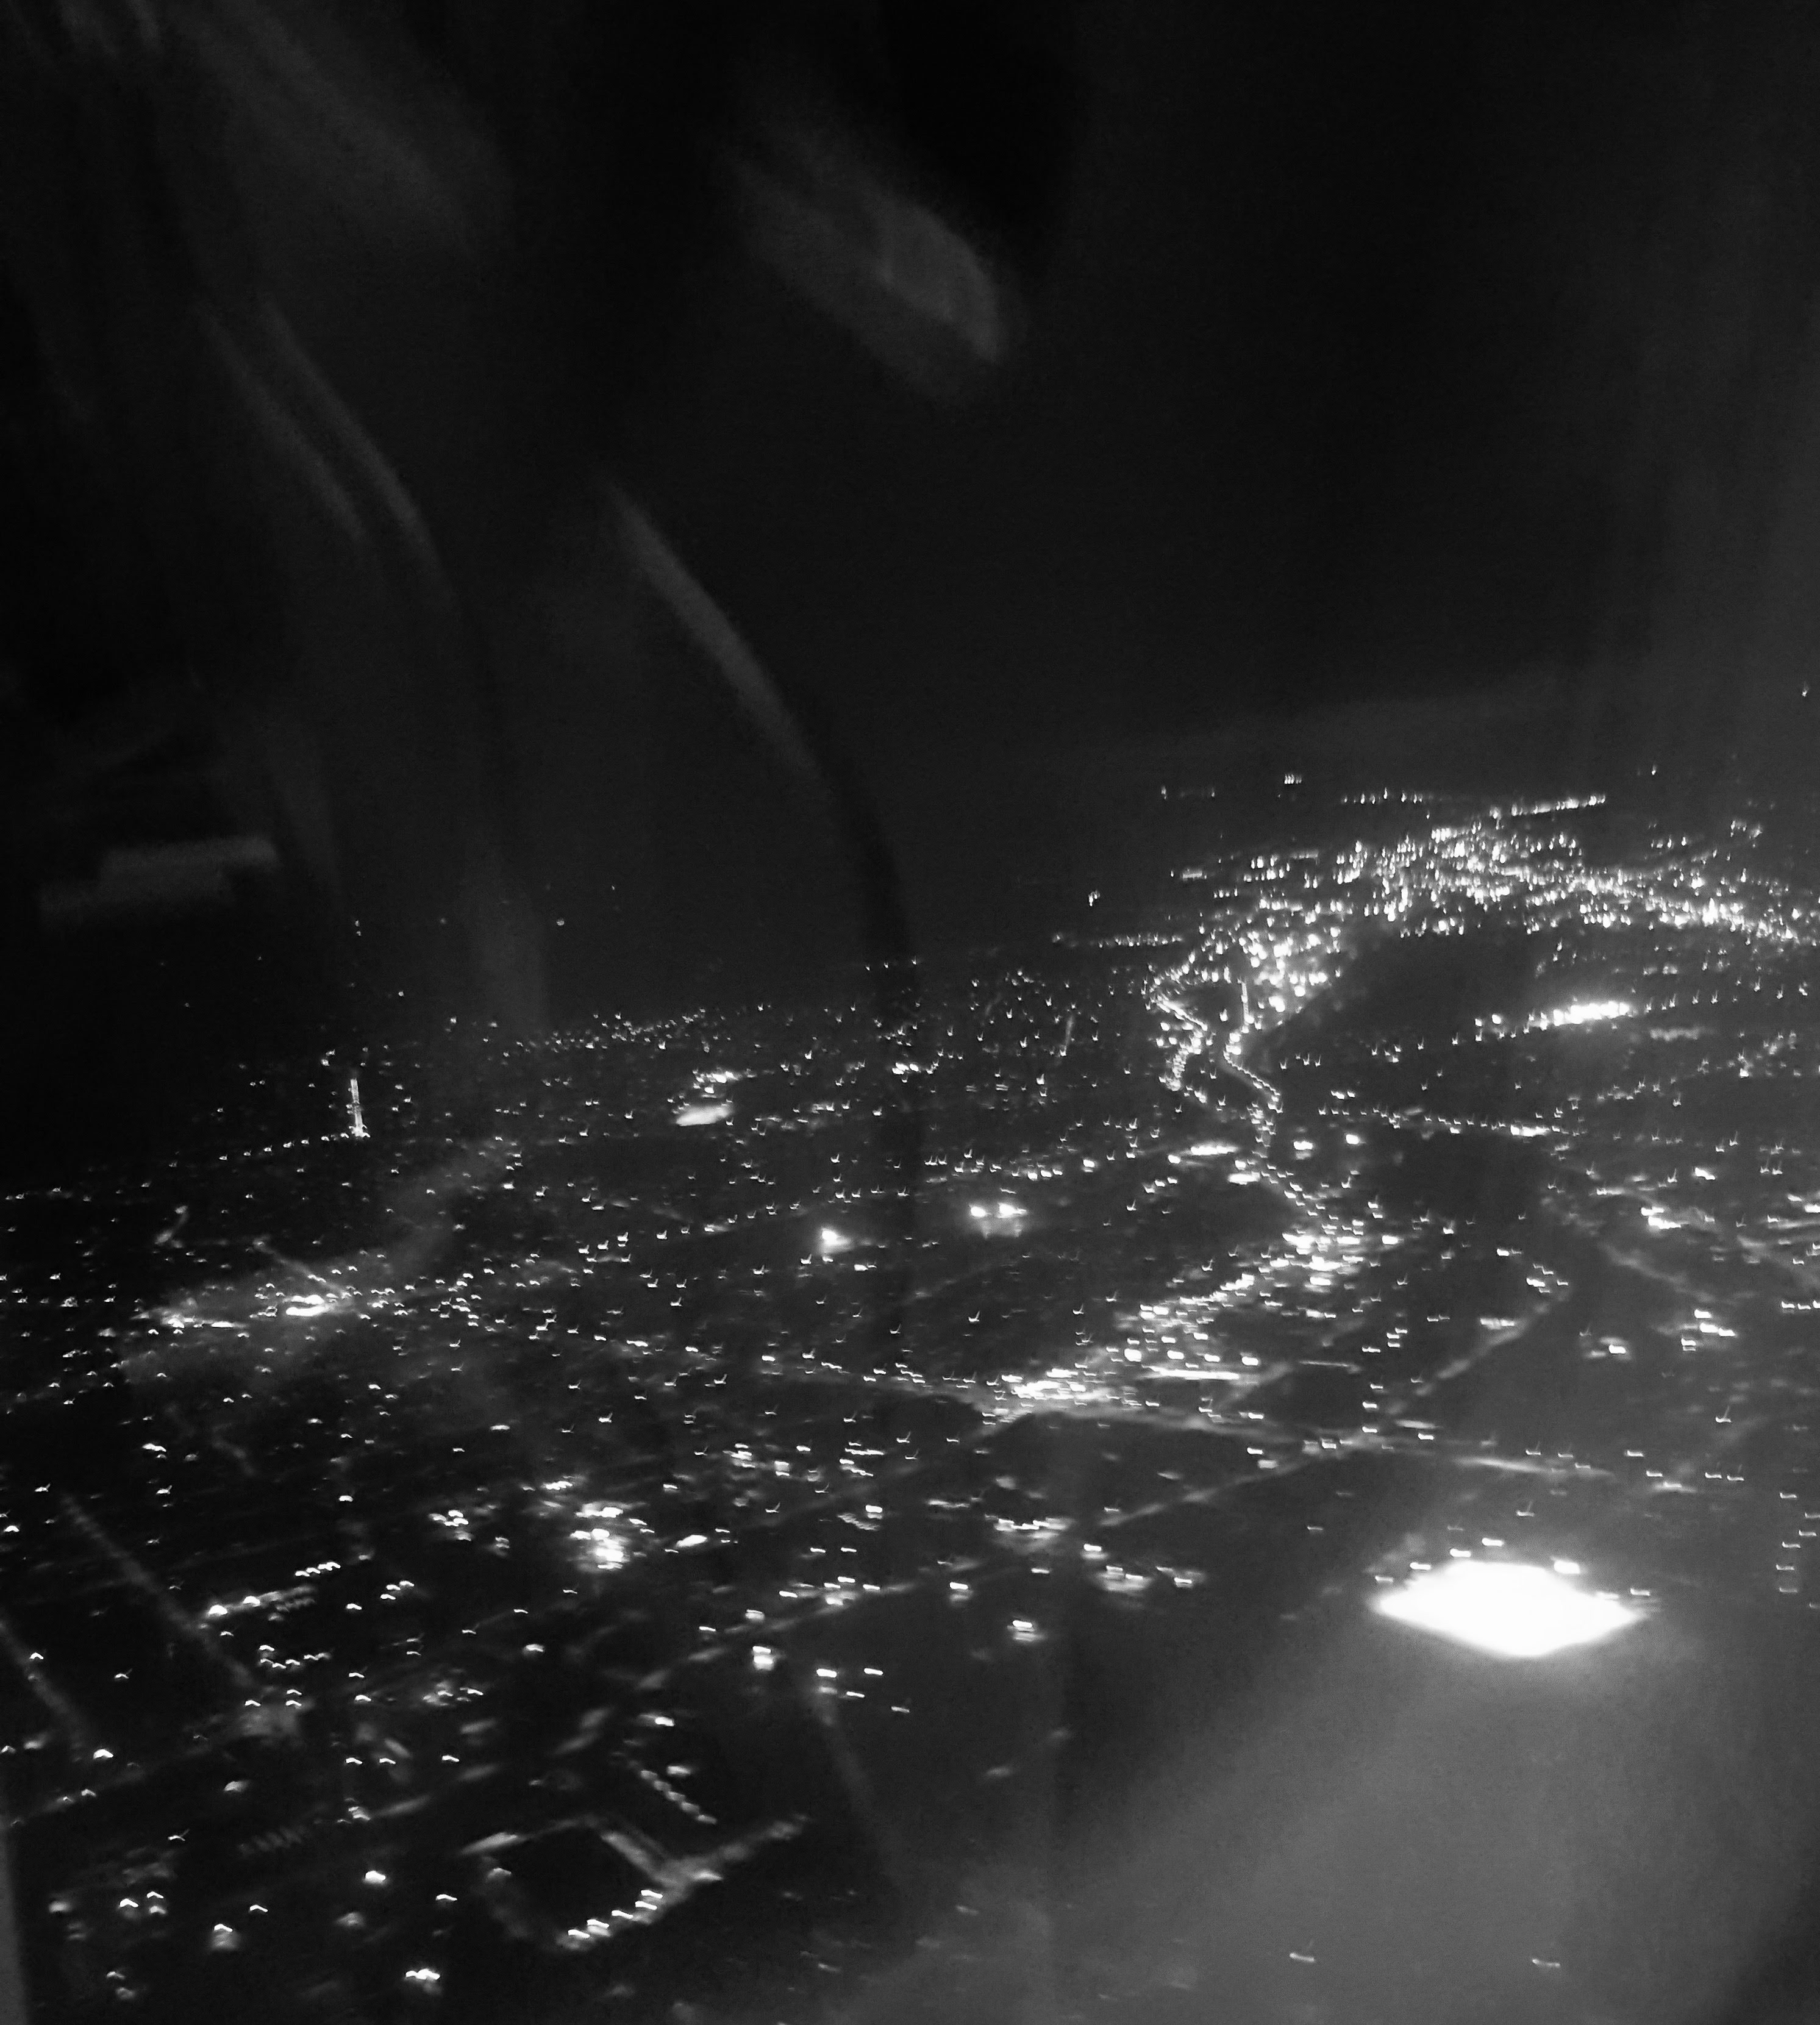 lights of a city seen from a plane. Black and white